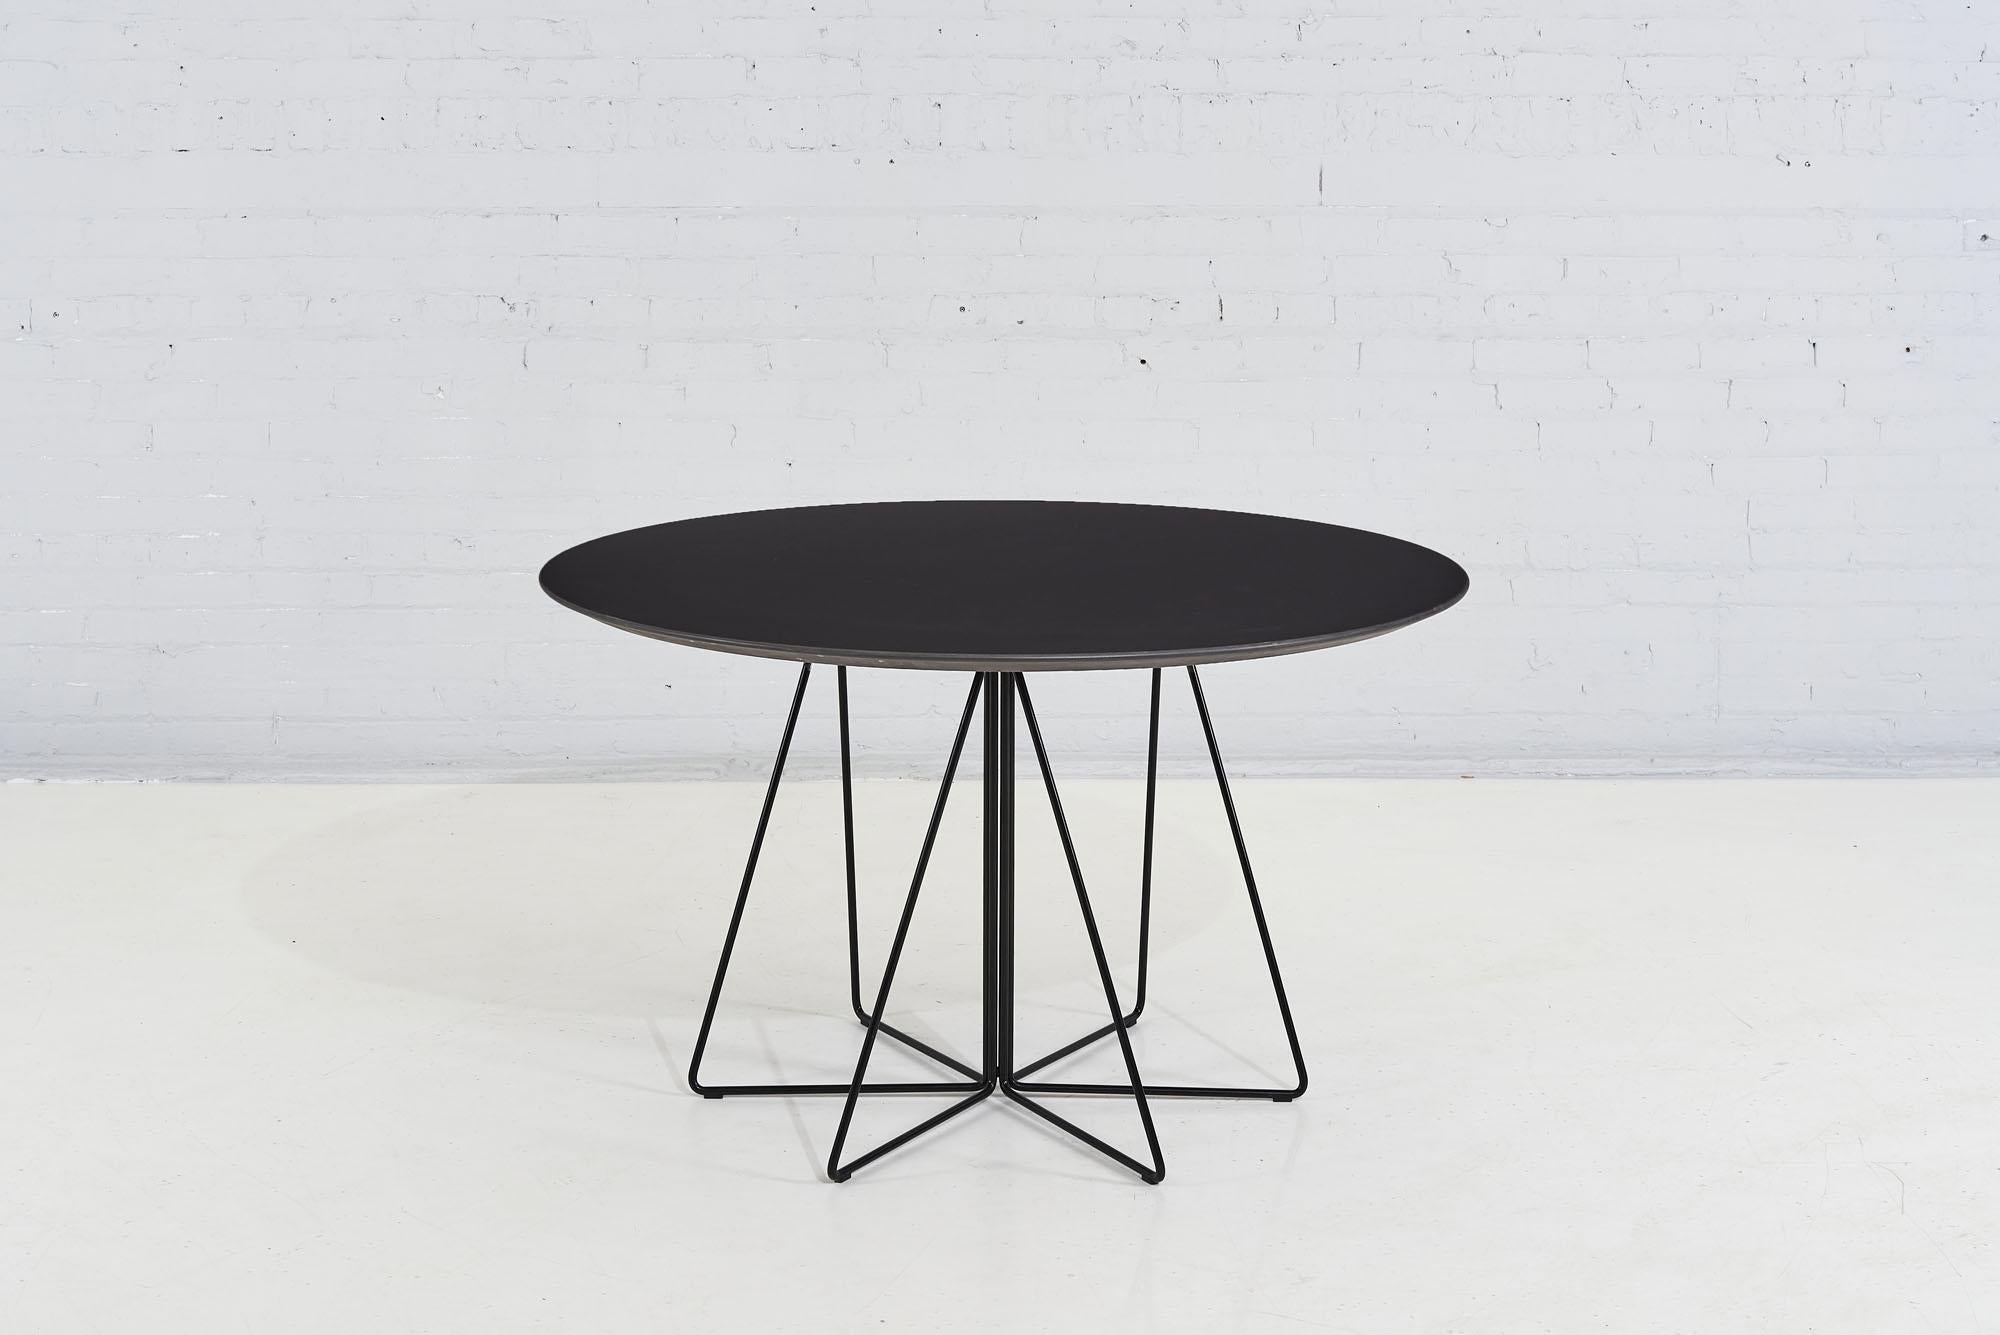 Paper clip dining table by Vignelli designs for Knoll, 1994. Black laminate knife edge table top with black metal base.